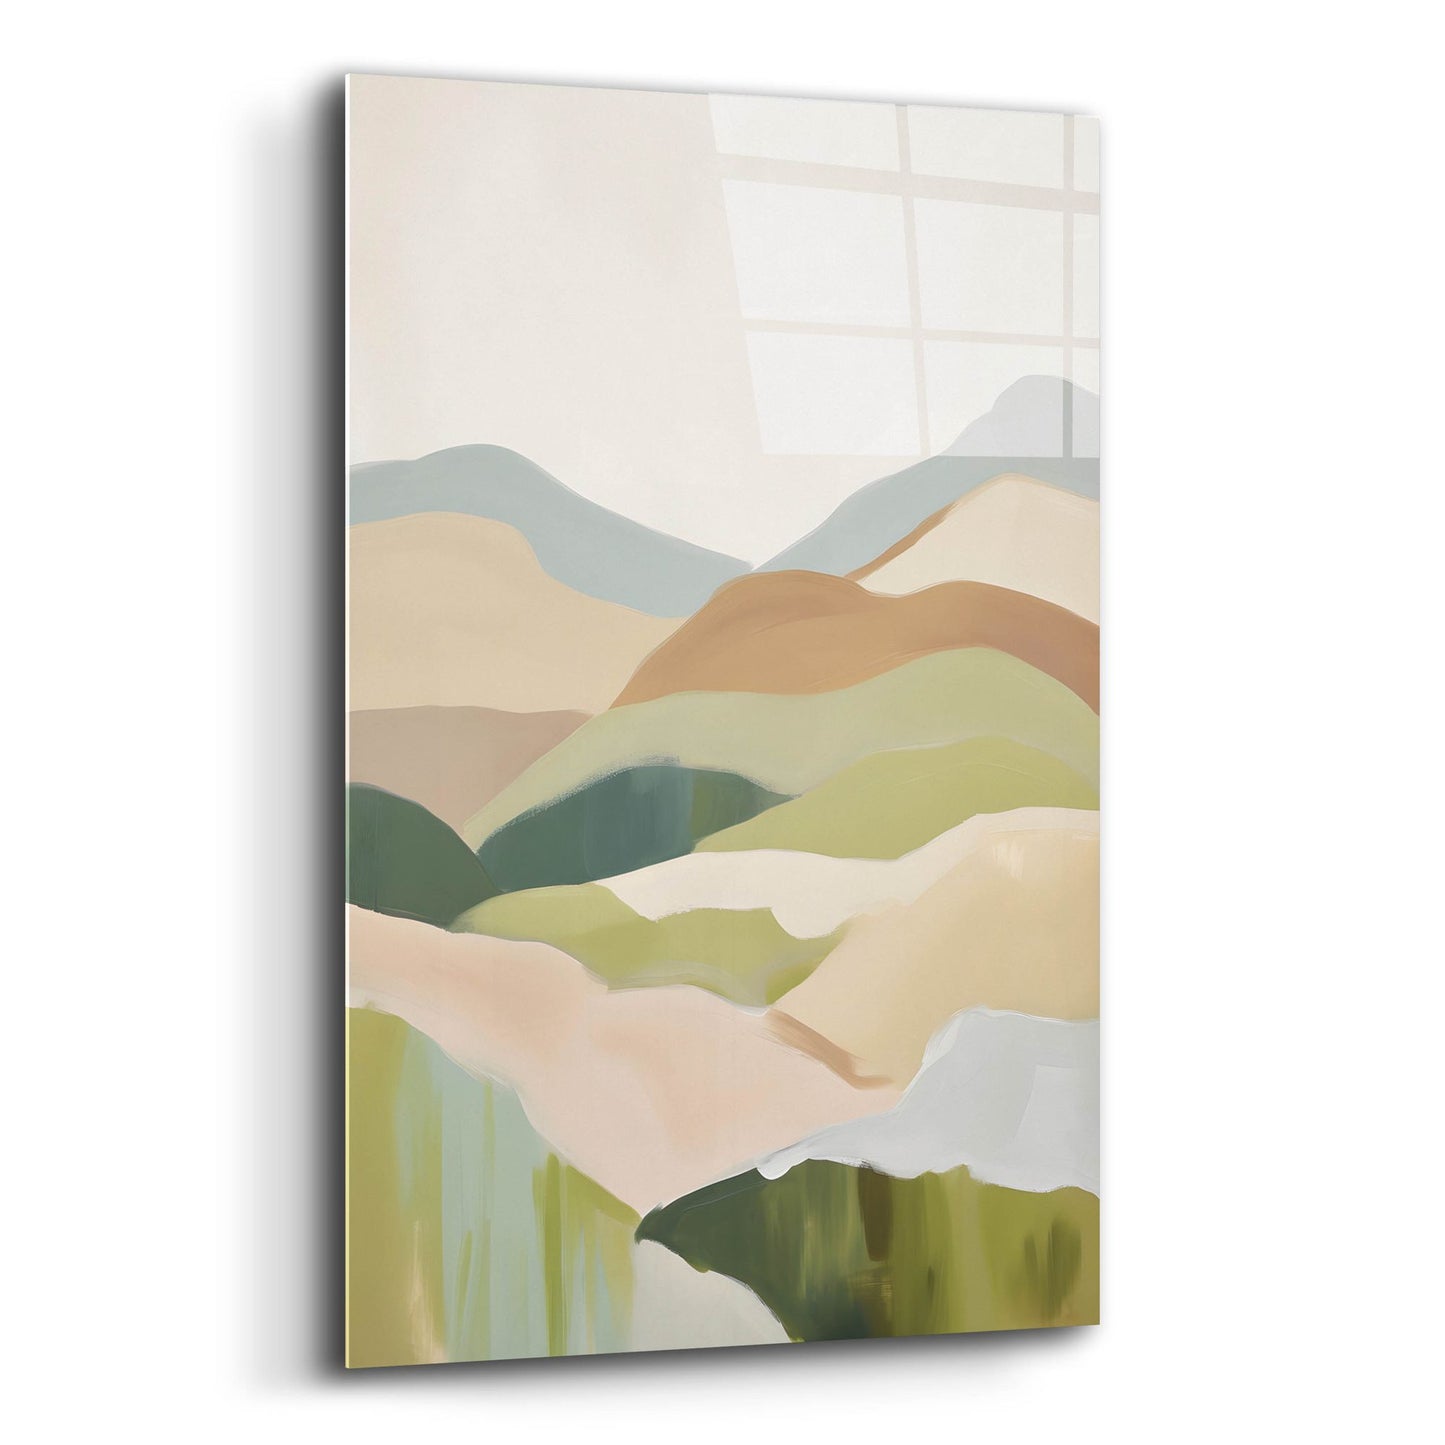 Epic Art 'Abstract Mountain 2' by Petals Prints Design, Acrylic Glass Wall Art,12x16